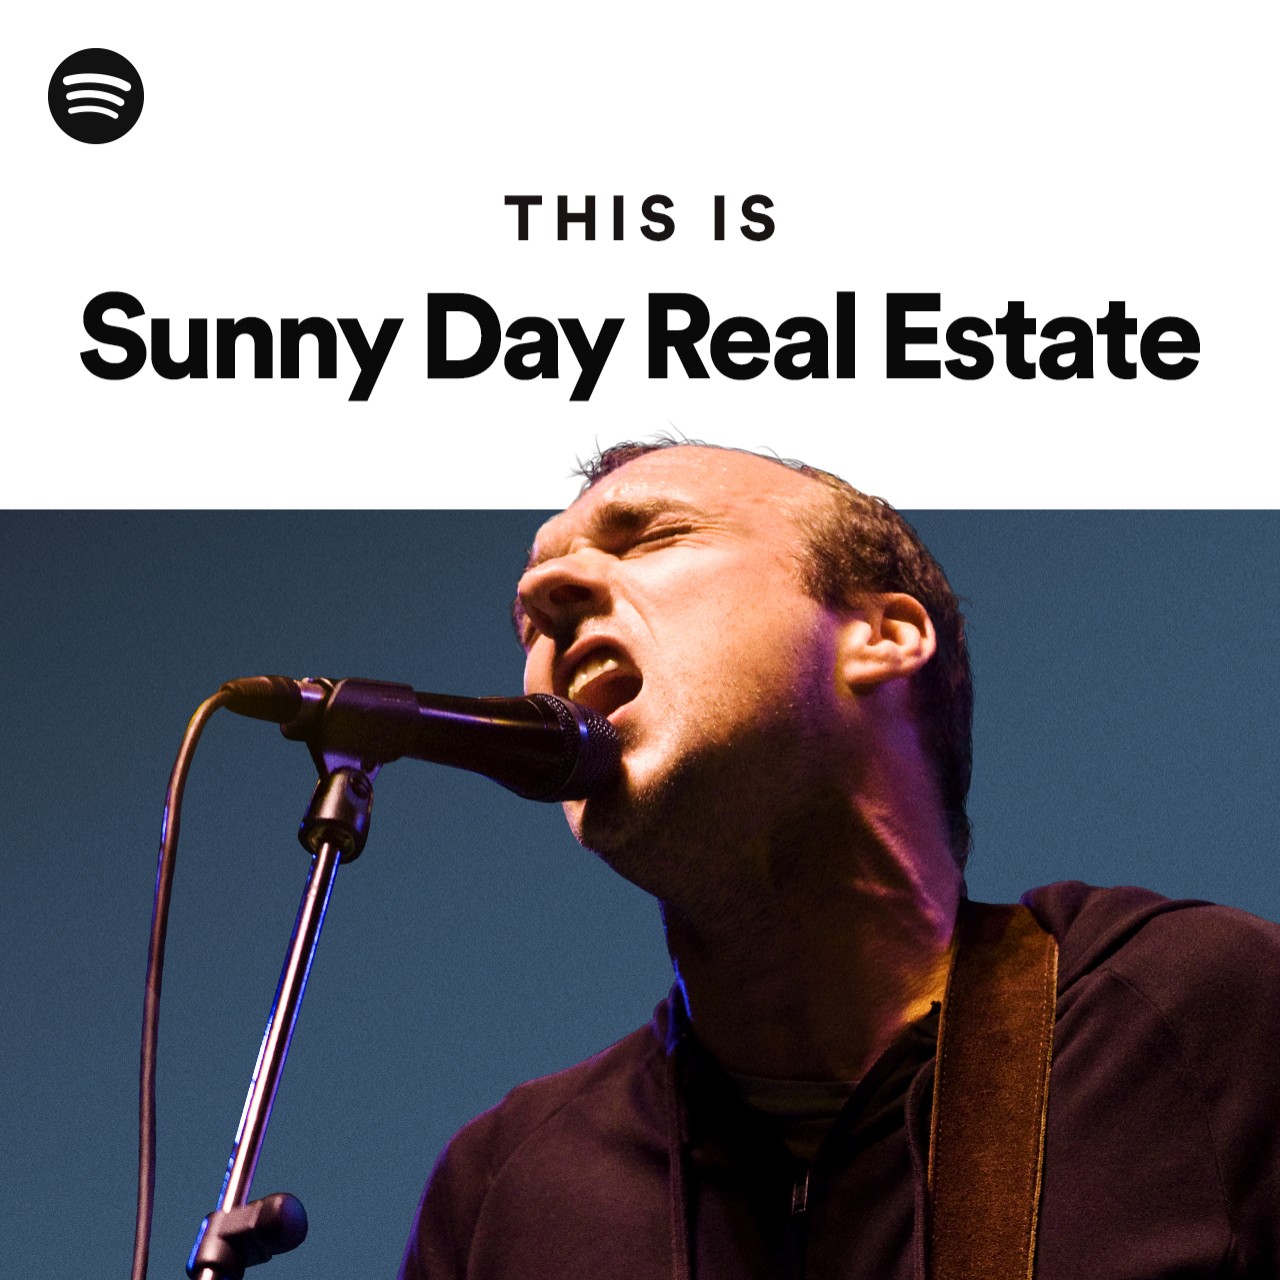 This Is Sunny Day Real Estate